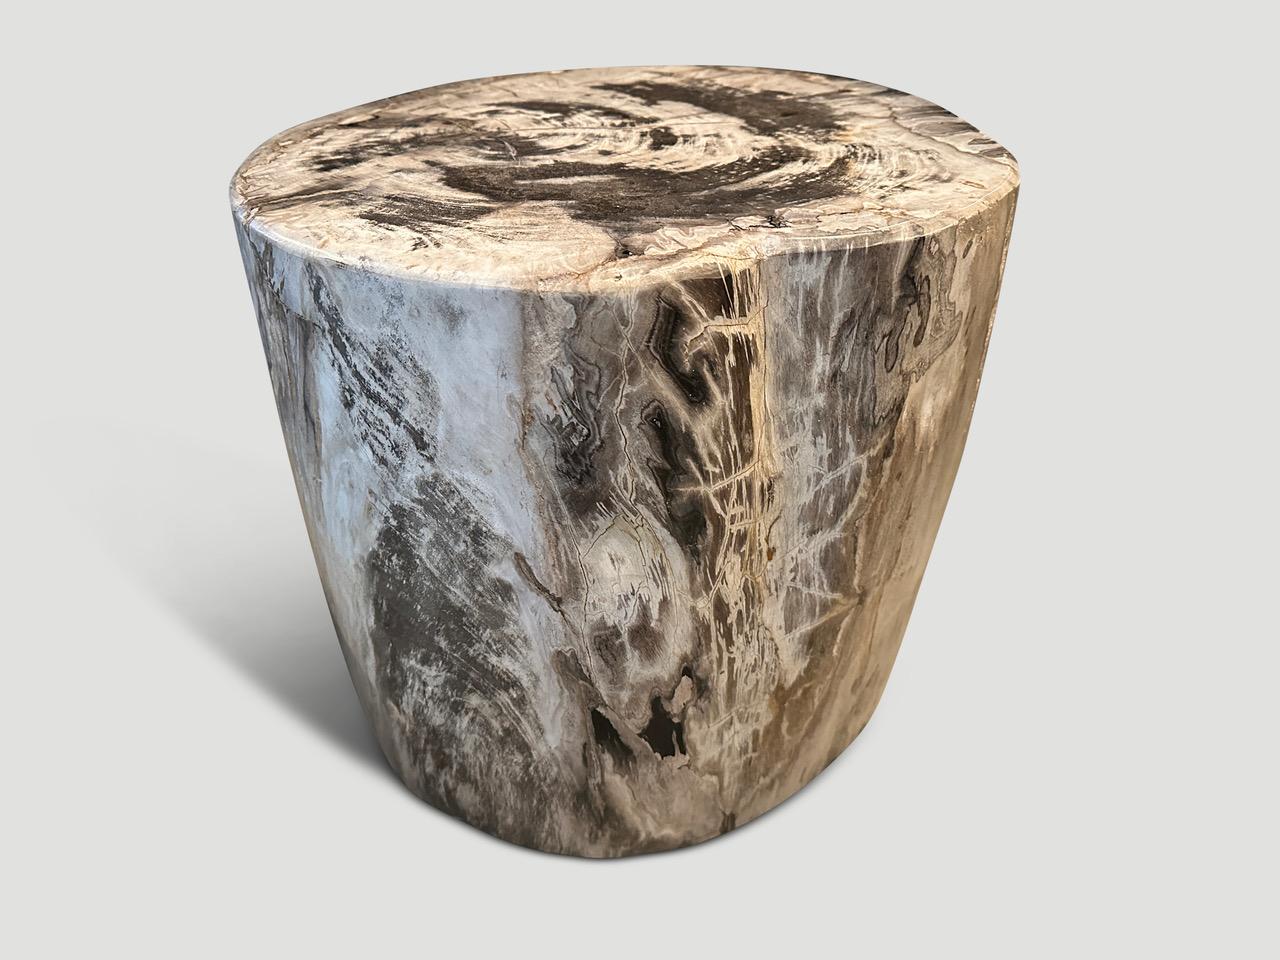 Impressive high quality petrified wood side table. It’s fascinating how Mother Nature produces these stunning 40 million year old petrified teak logs with such contrasting colors and natural patterns throughout. Modern yet with so much history. We